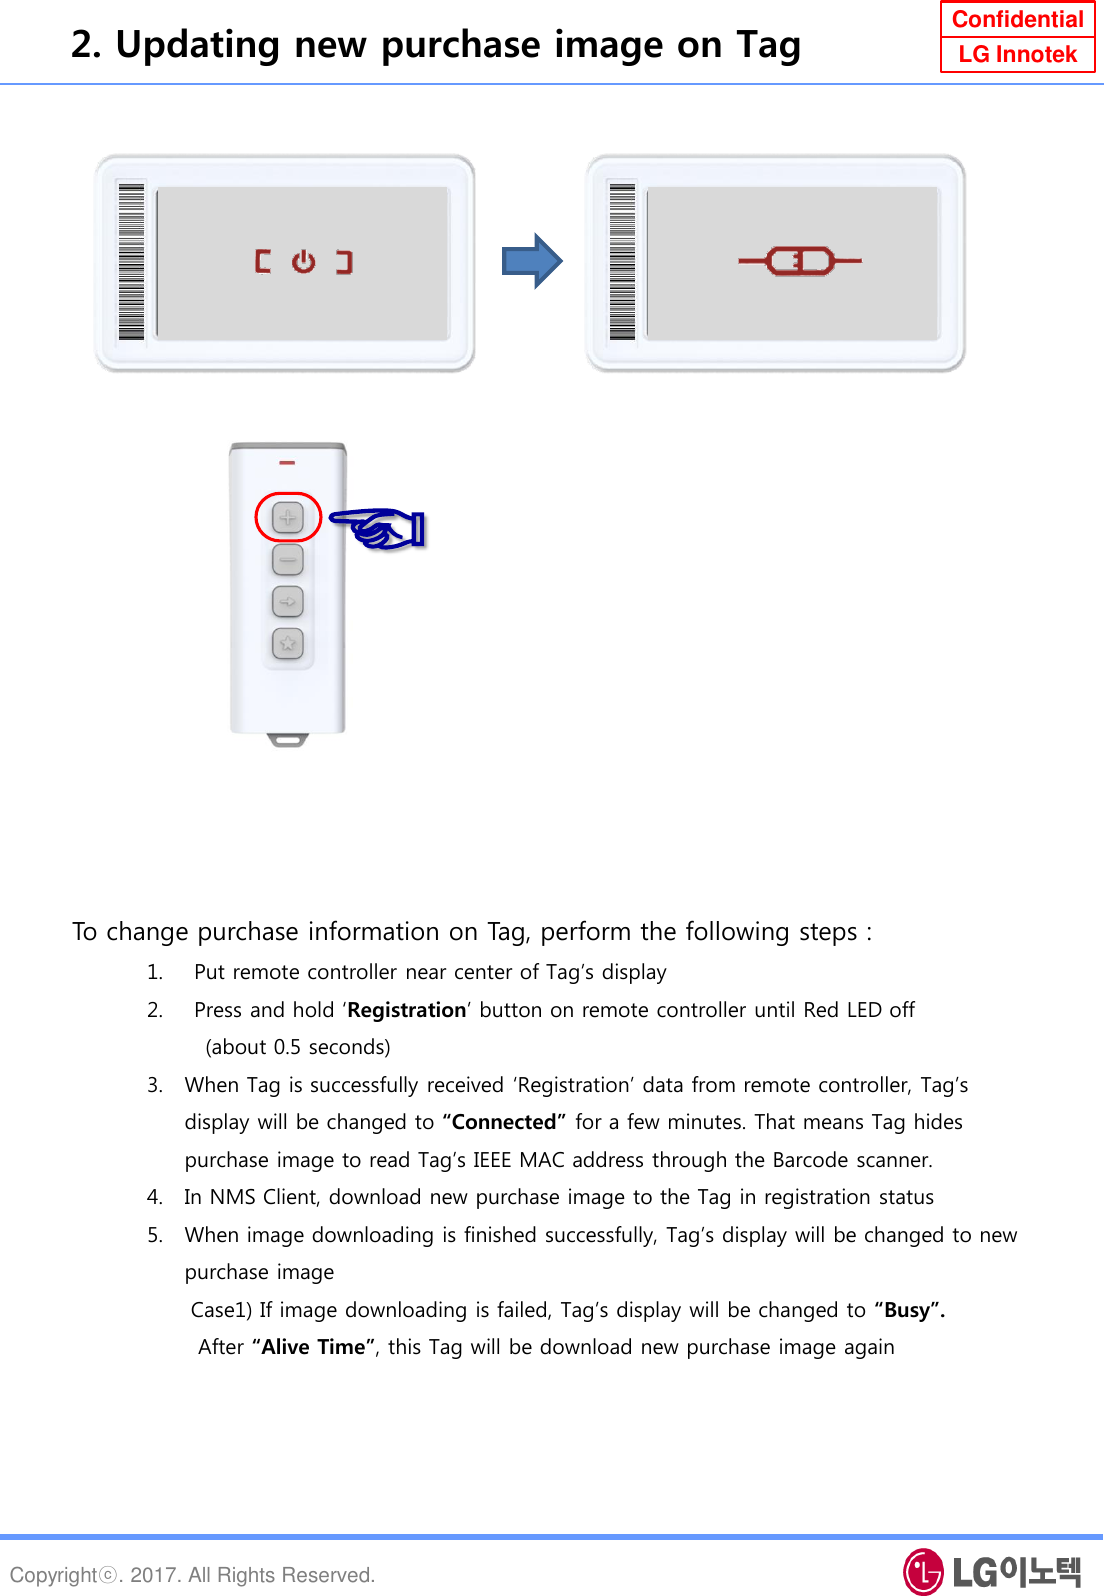 Copyrightⓒ. 2017. All Rights Reserved. Confidential LG Innotek To change purchase information on Tag, perform the following steps : 1. Put remote controller near center of Tag‟s display 2. Press and hold „Registration‟ button on remote controller until Red LED off          (about 0.5 seconds) 3. When Tag is successfully received „Registration‟ data from remote controller, Tag‟s display will be changed to “Connected” for a few minutes. That means Tag hides purchase image to read Tag‟s IEEE MAC address through the Barcode scanner. 4. In NMS Client, download new purchase image to the Tag in registration status 5. When image downloading is finished successfully, Tag‟s display will be changed to new purchase image        Case1) If image downloading is failed, Tag‟s display will be changed to “Busy”.           After “Alive Time”, this Tag will be download new purchase image again 2. Updating new purchase image on Tag ☜ 